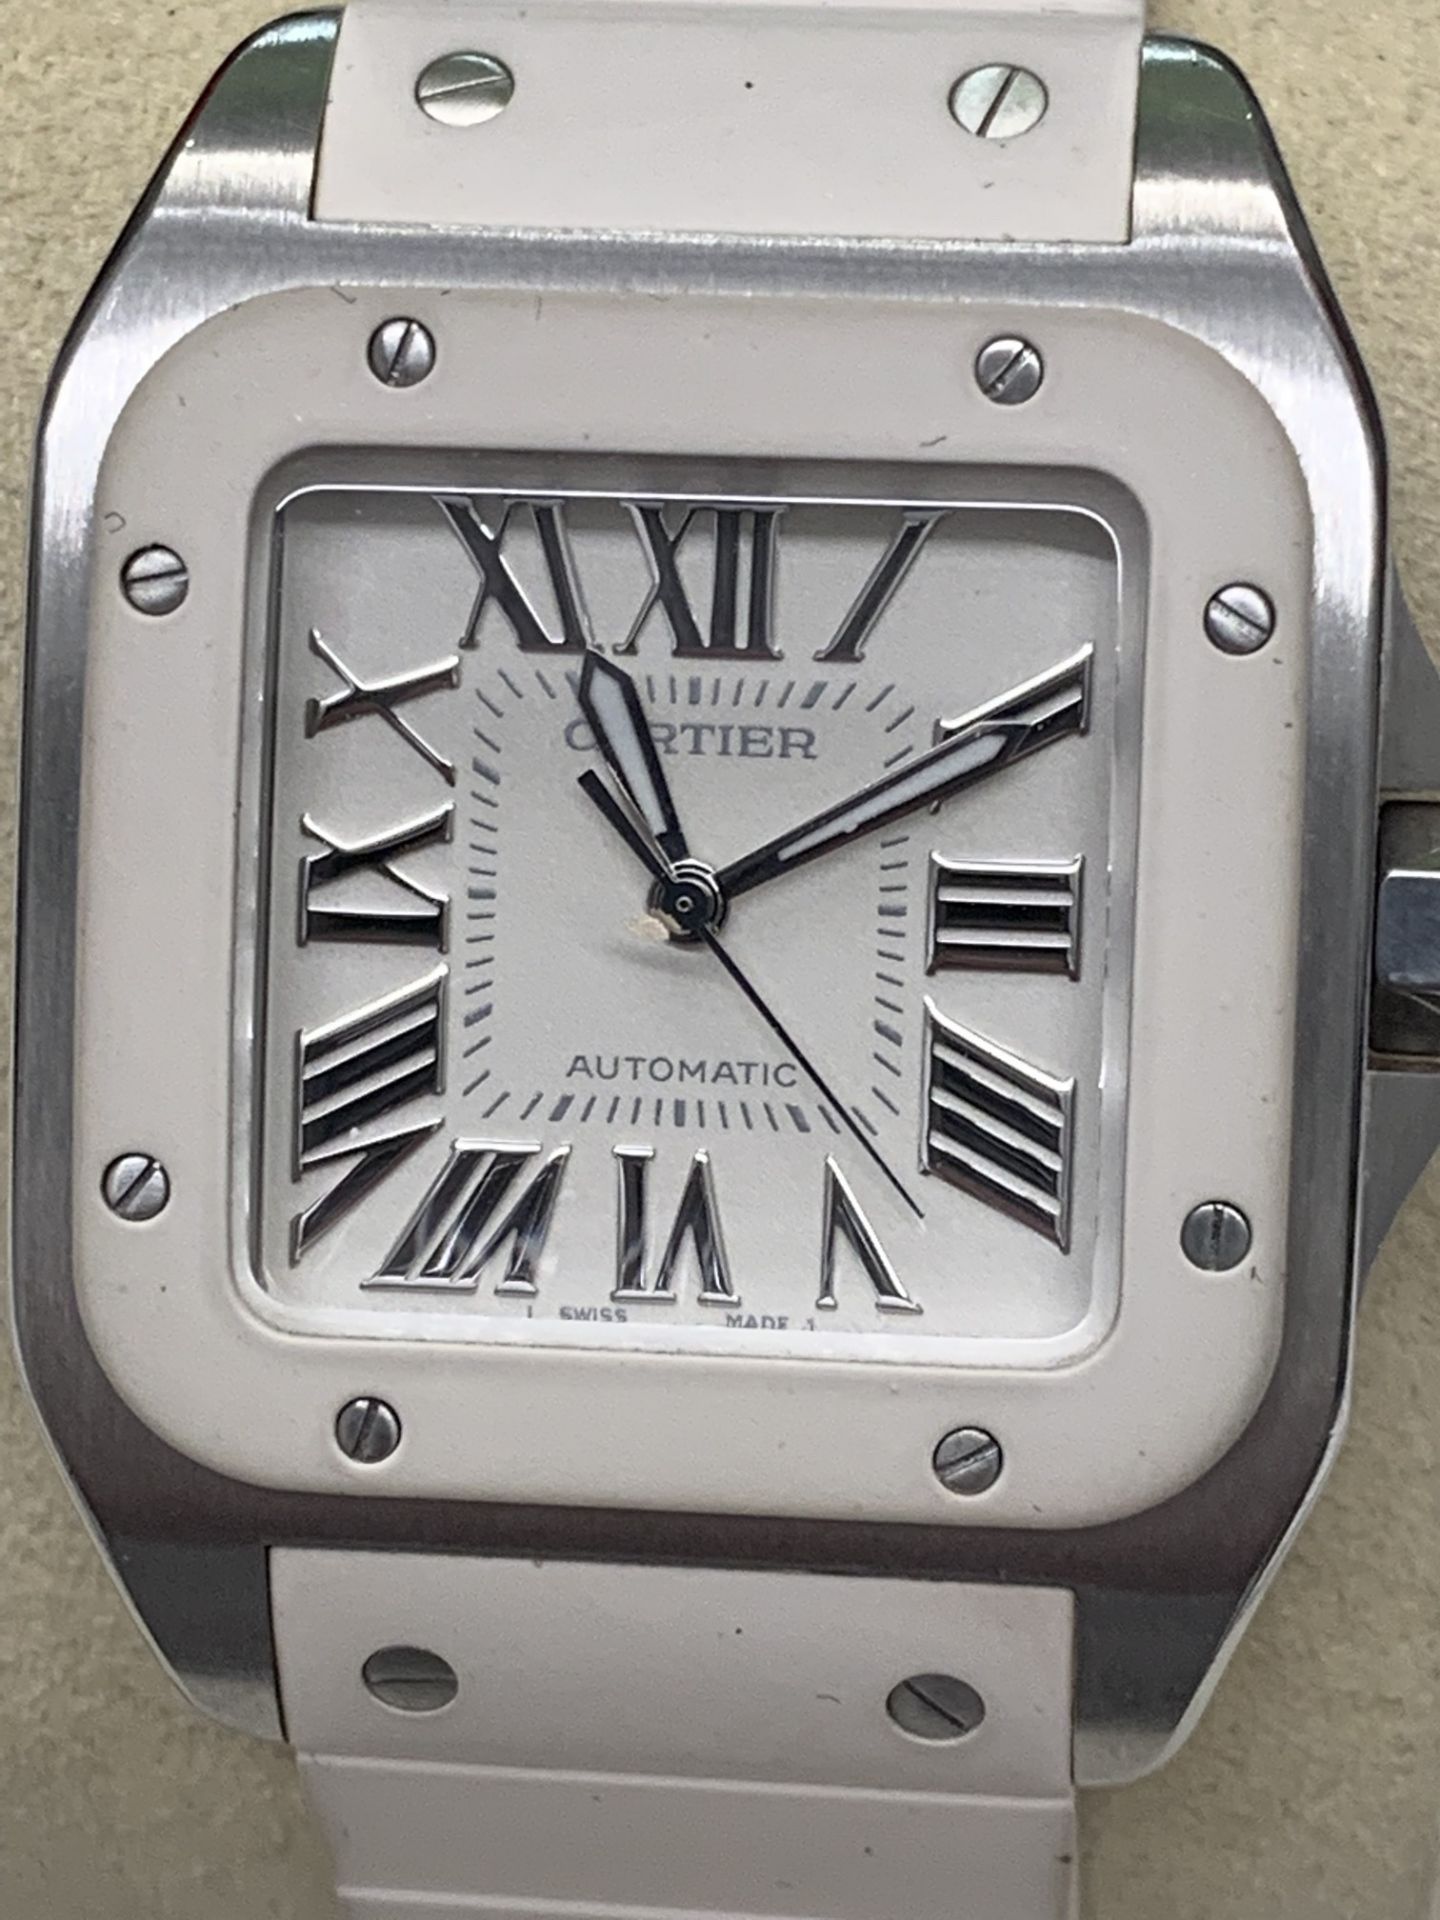 CARTIER SANTOS 100 AUTOMATIC WATCH 33mm - Image 2 of 7